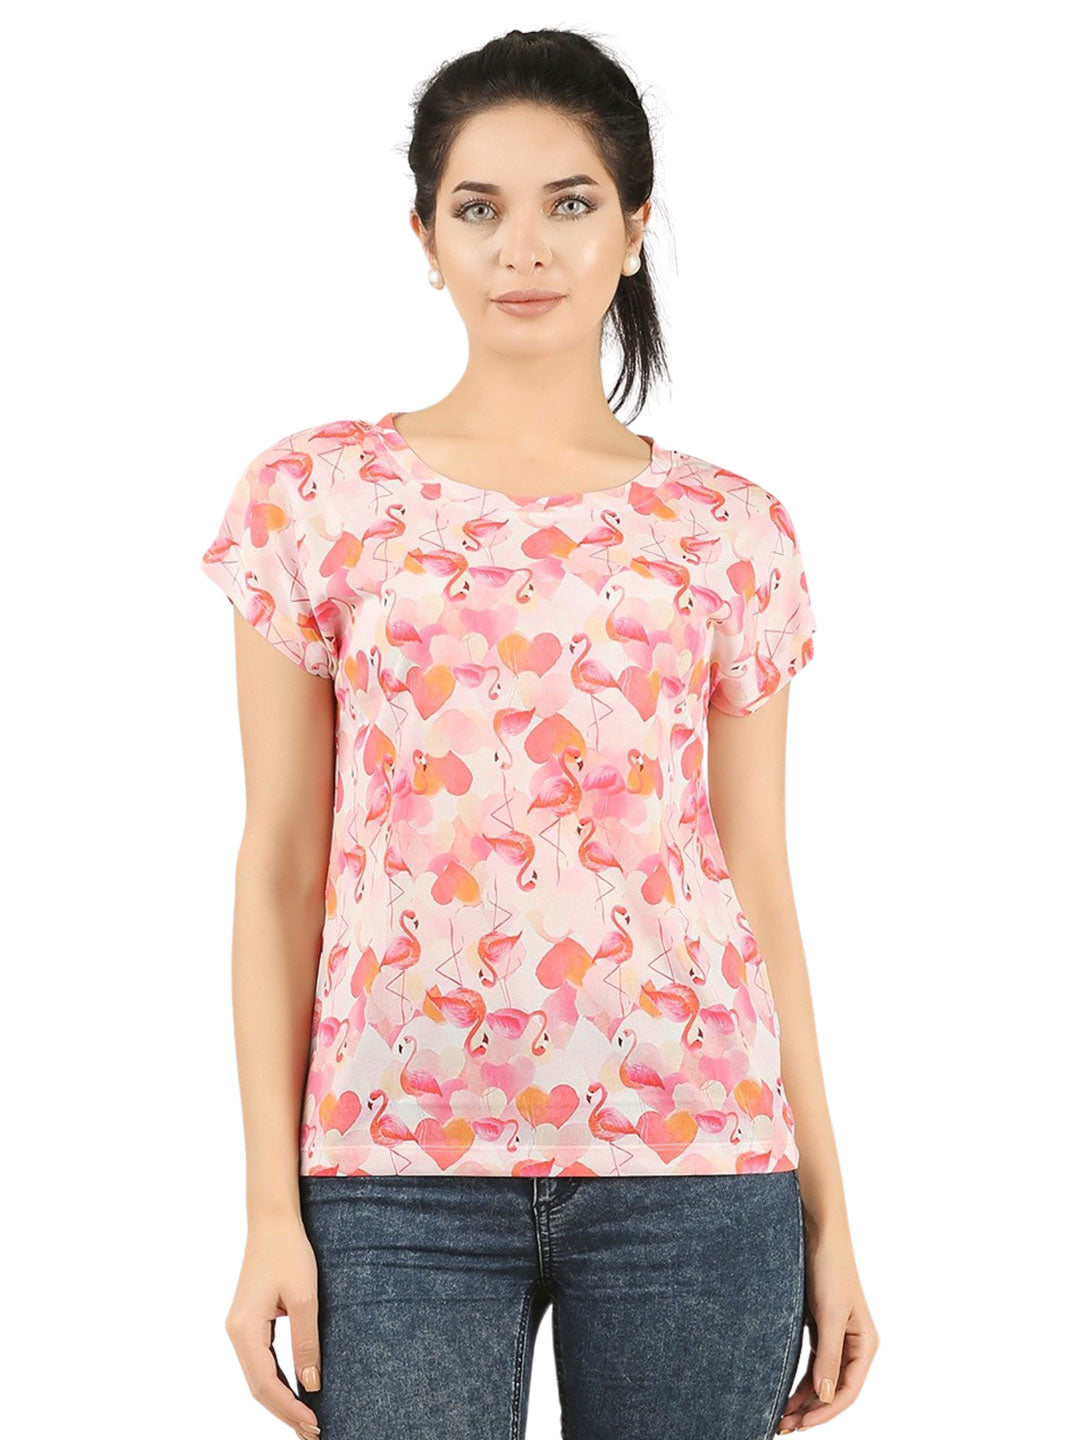 MARIA (100% POLYESTER REGULAR FIT CASUAL TOP FOR WOMENS)